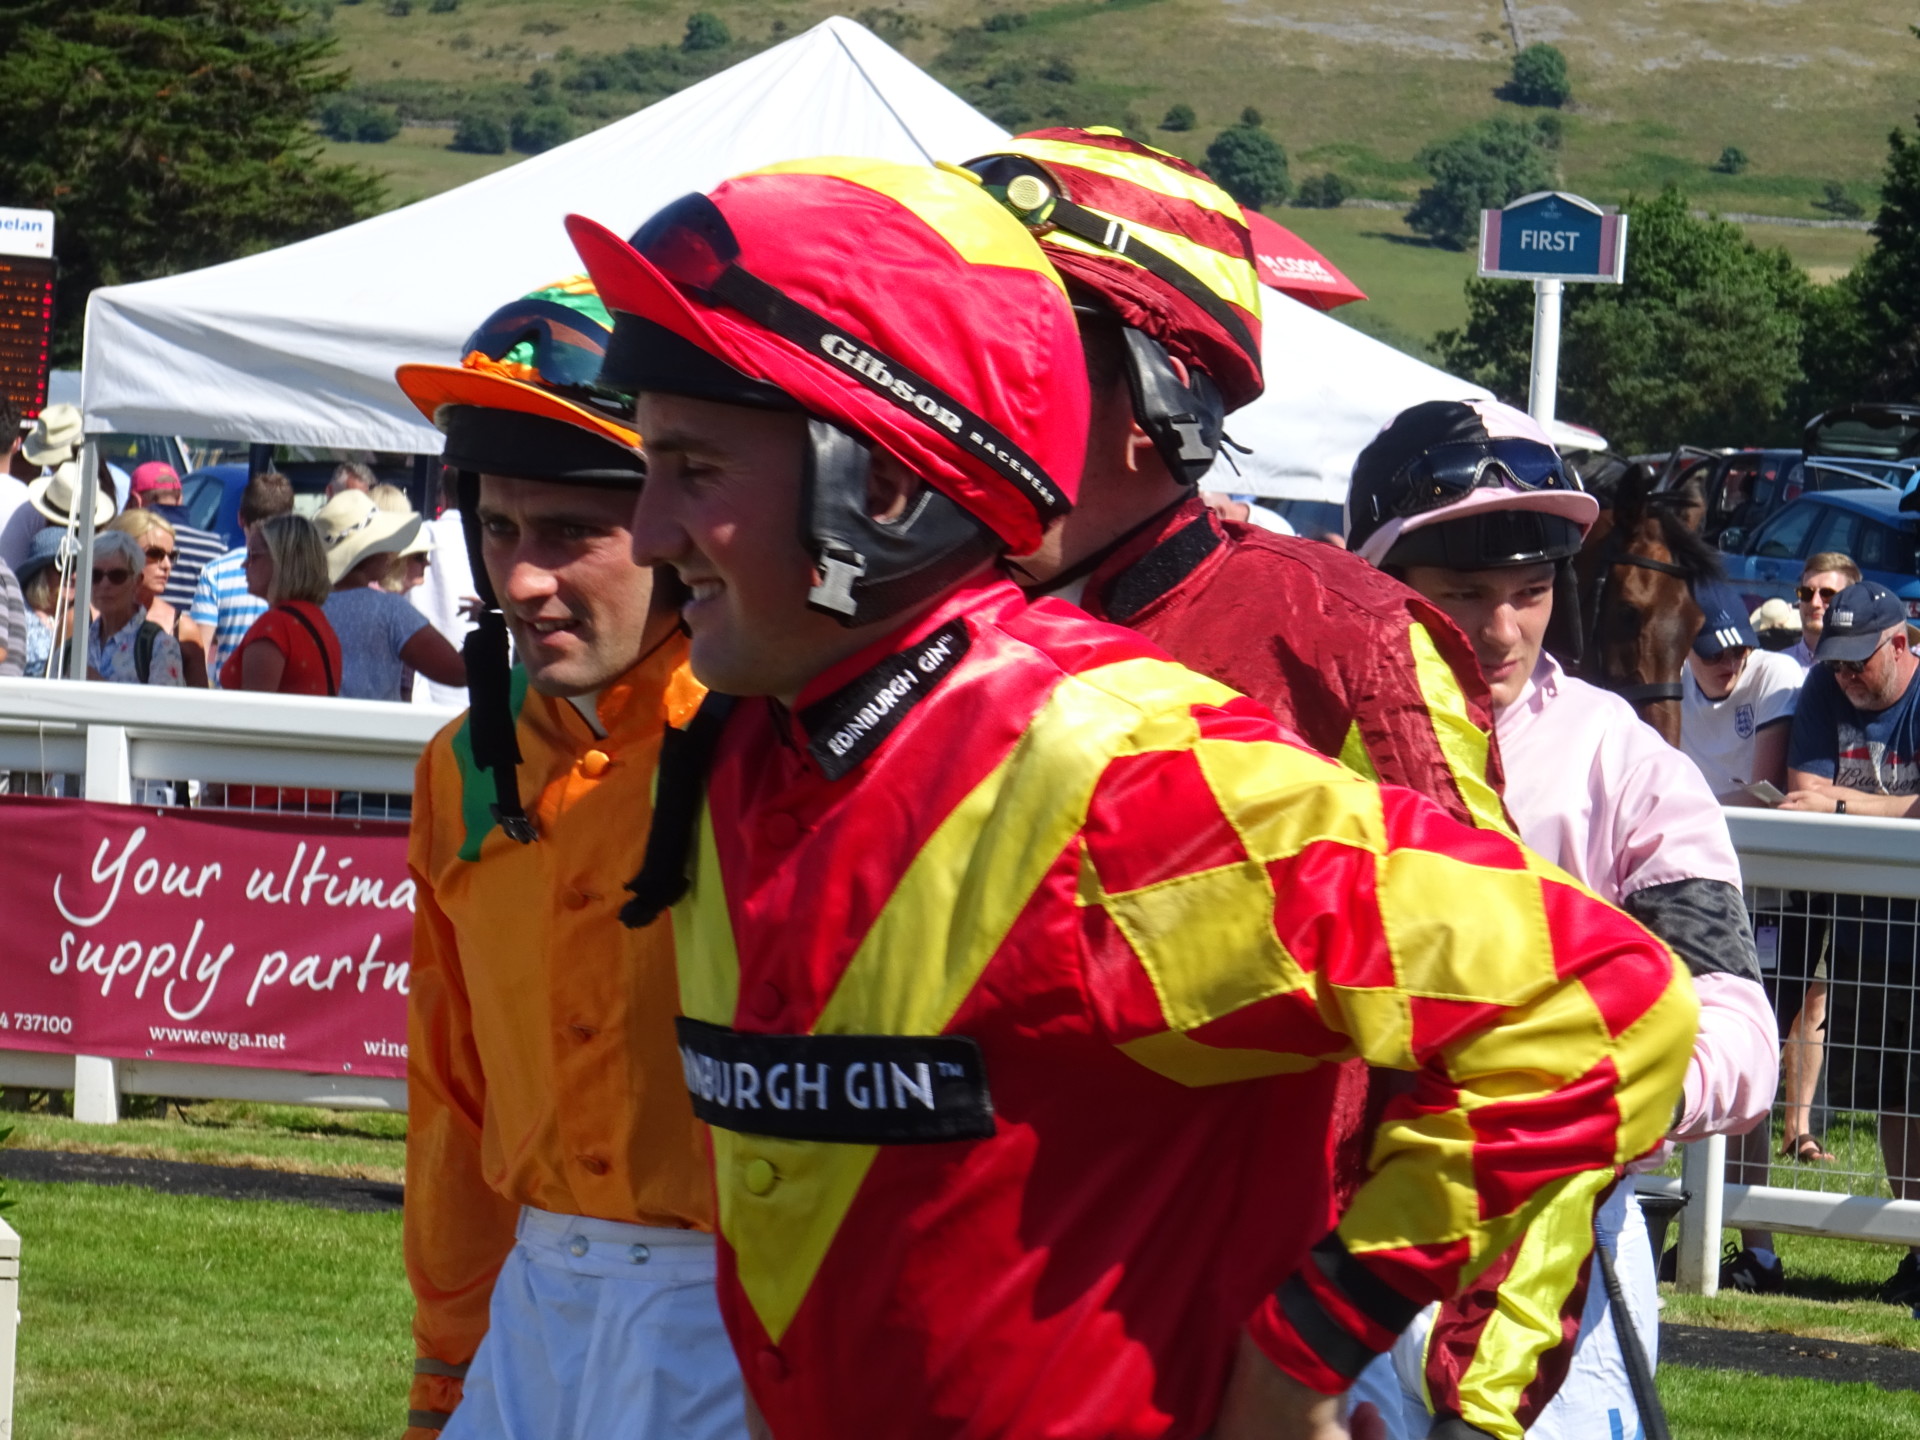 Tips for Cartmel Races